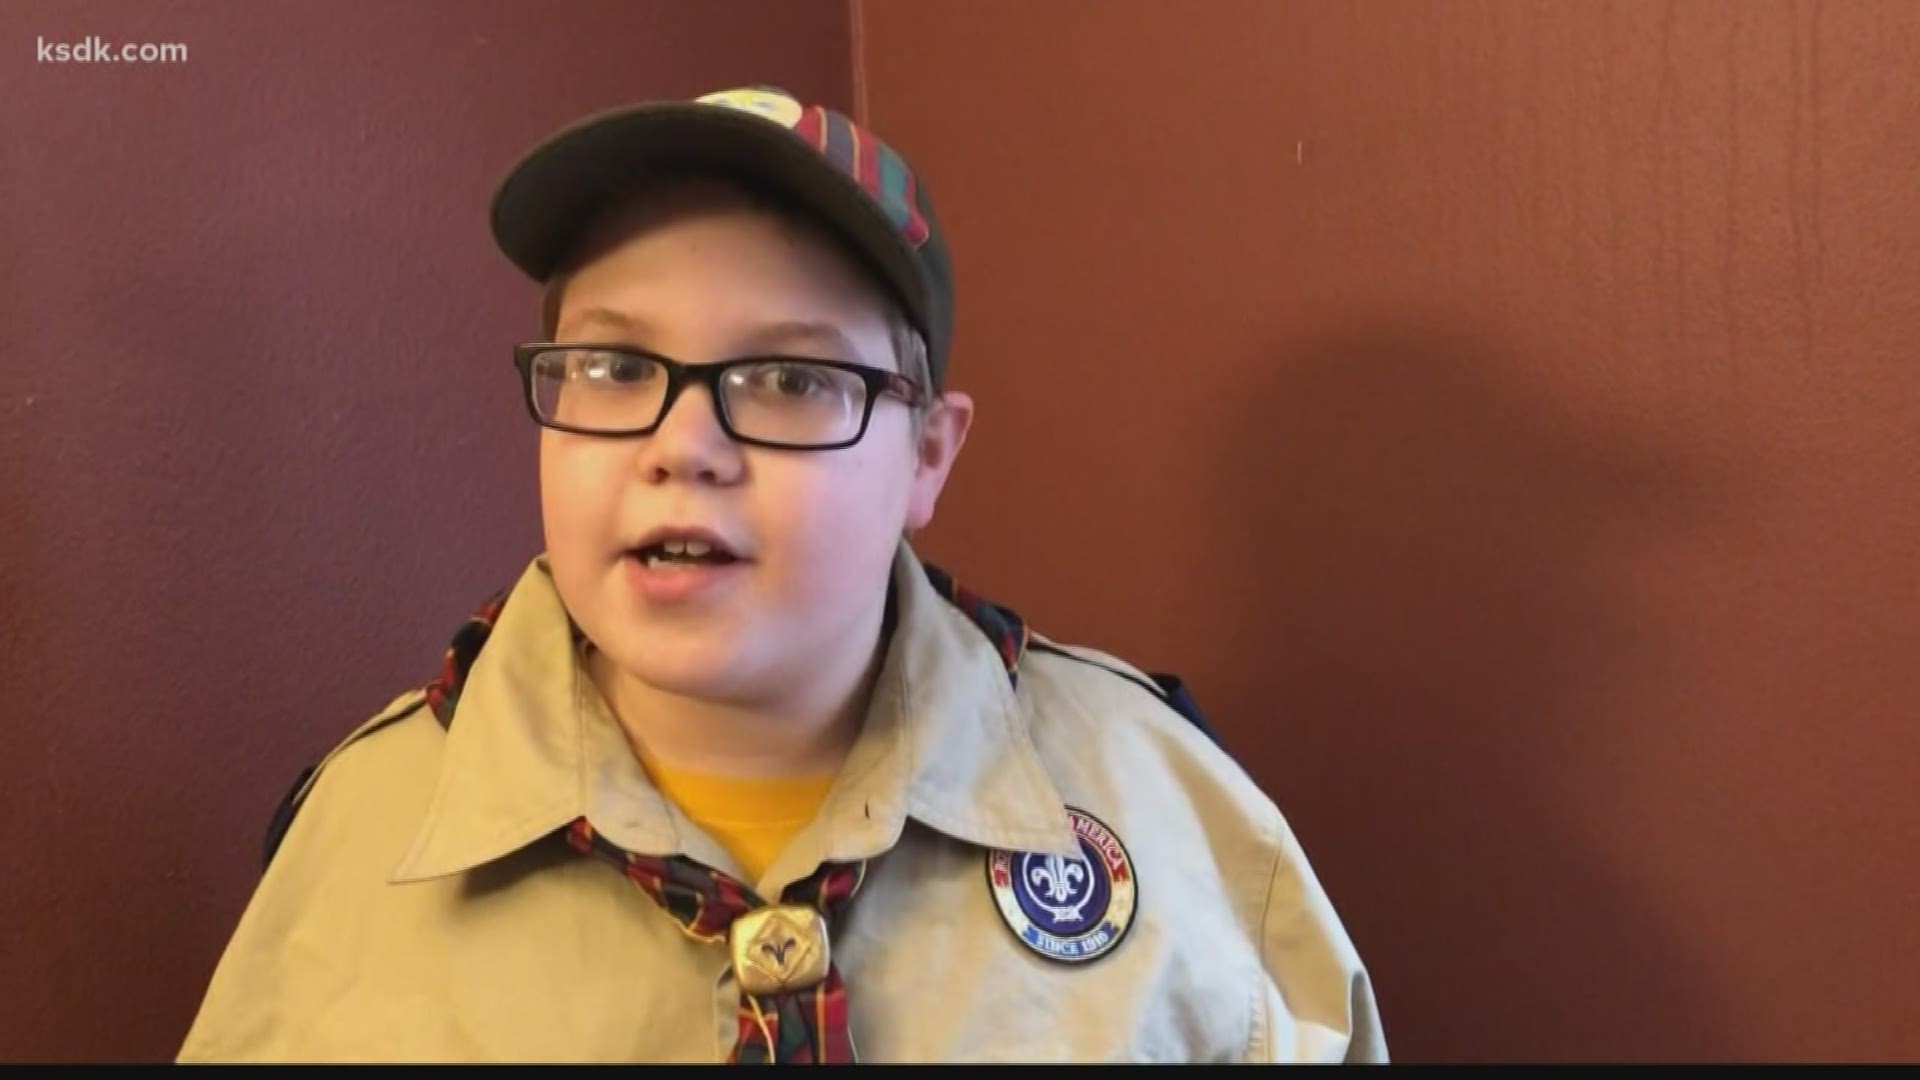 And a cub scout pack in Glen Carbon is holding a virtual food drive for people in need.